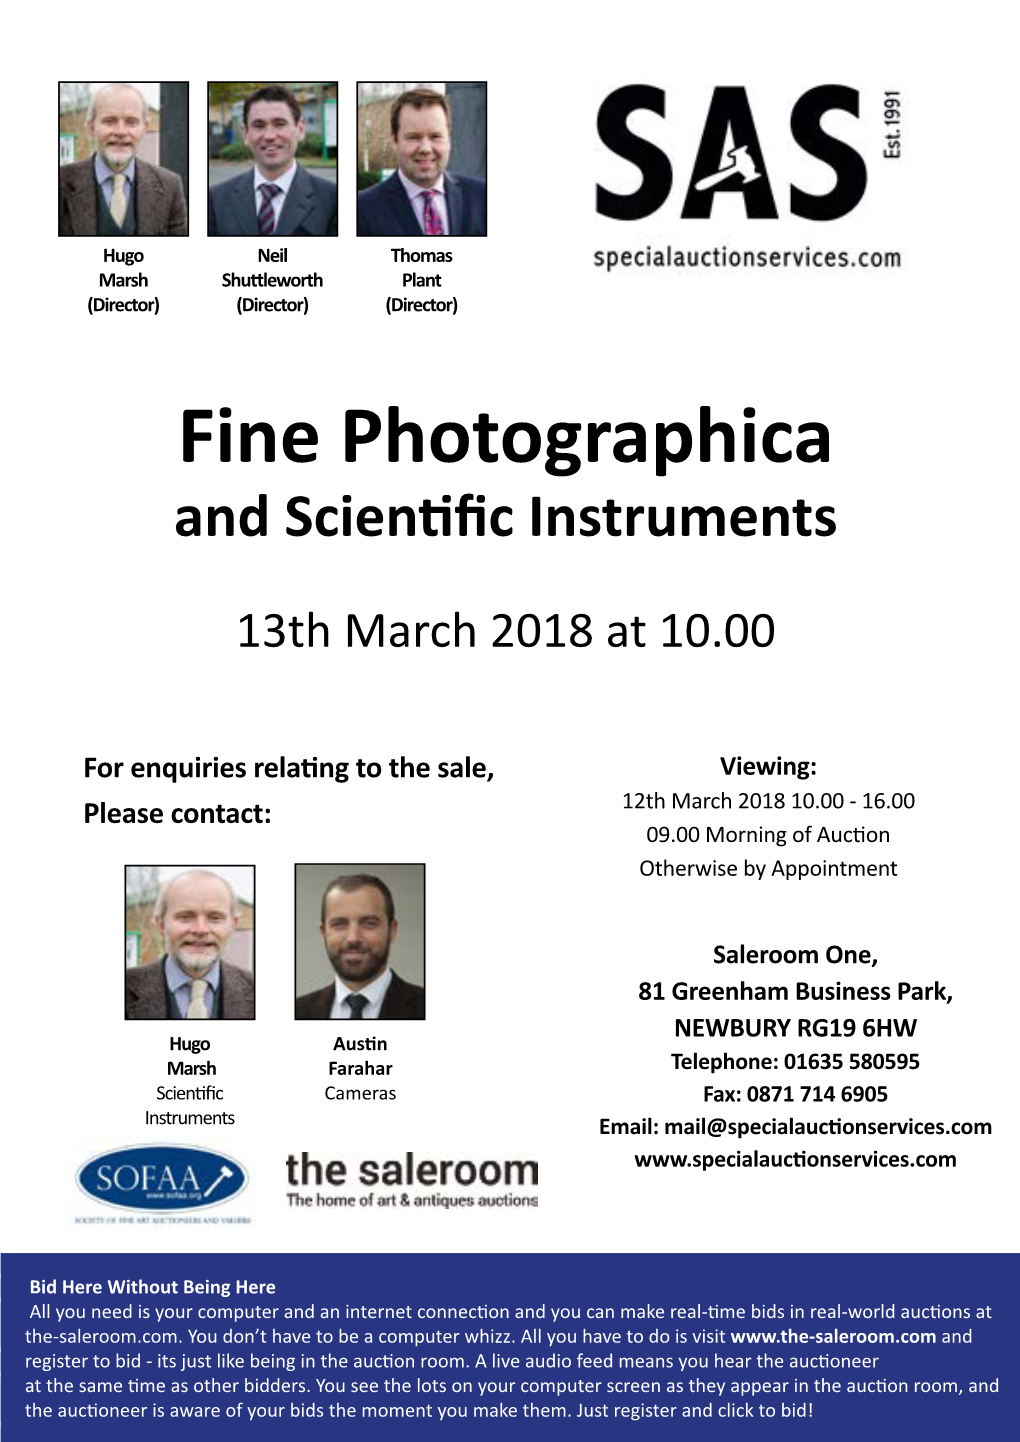 Fine Photographica and Scientific Instruments